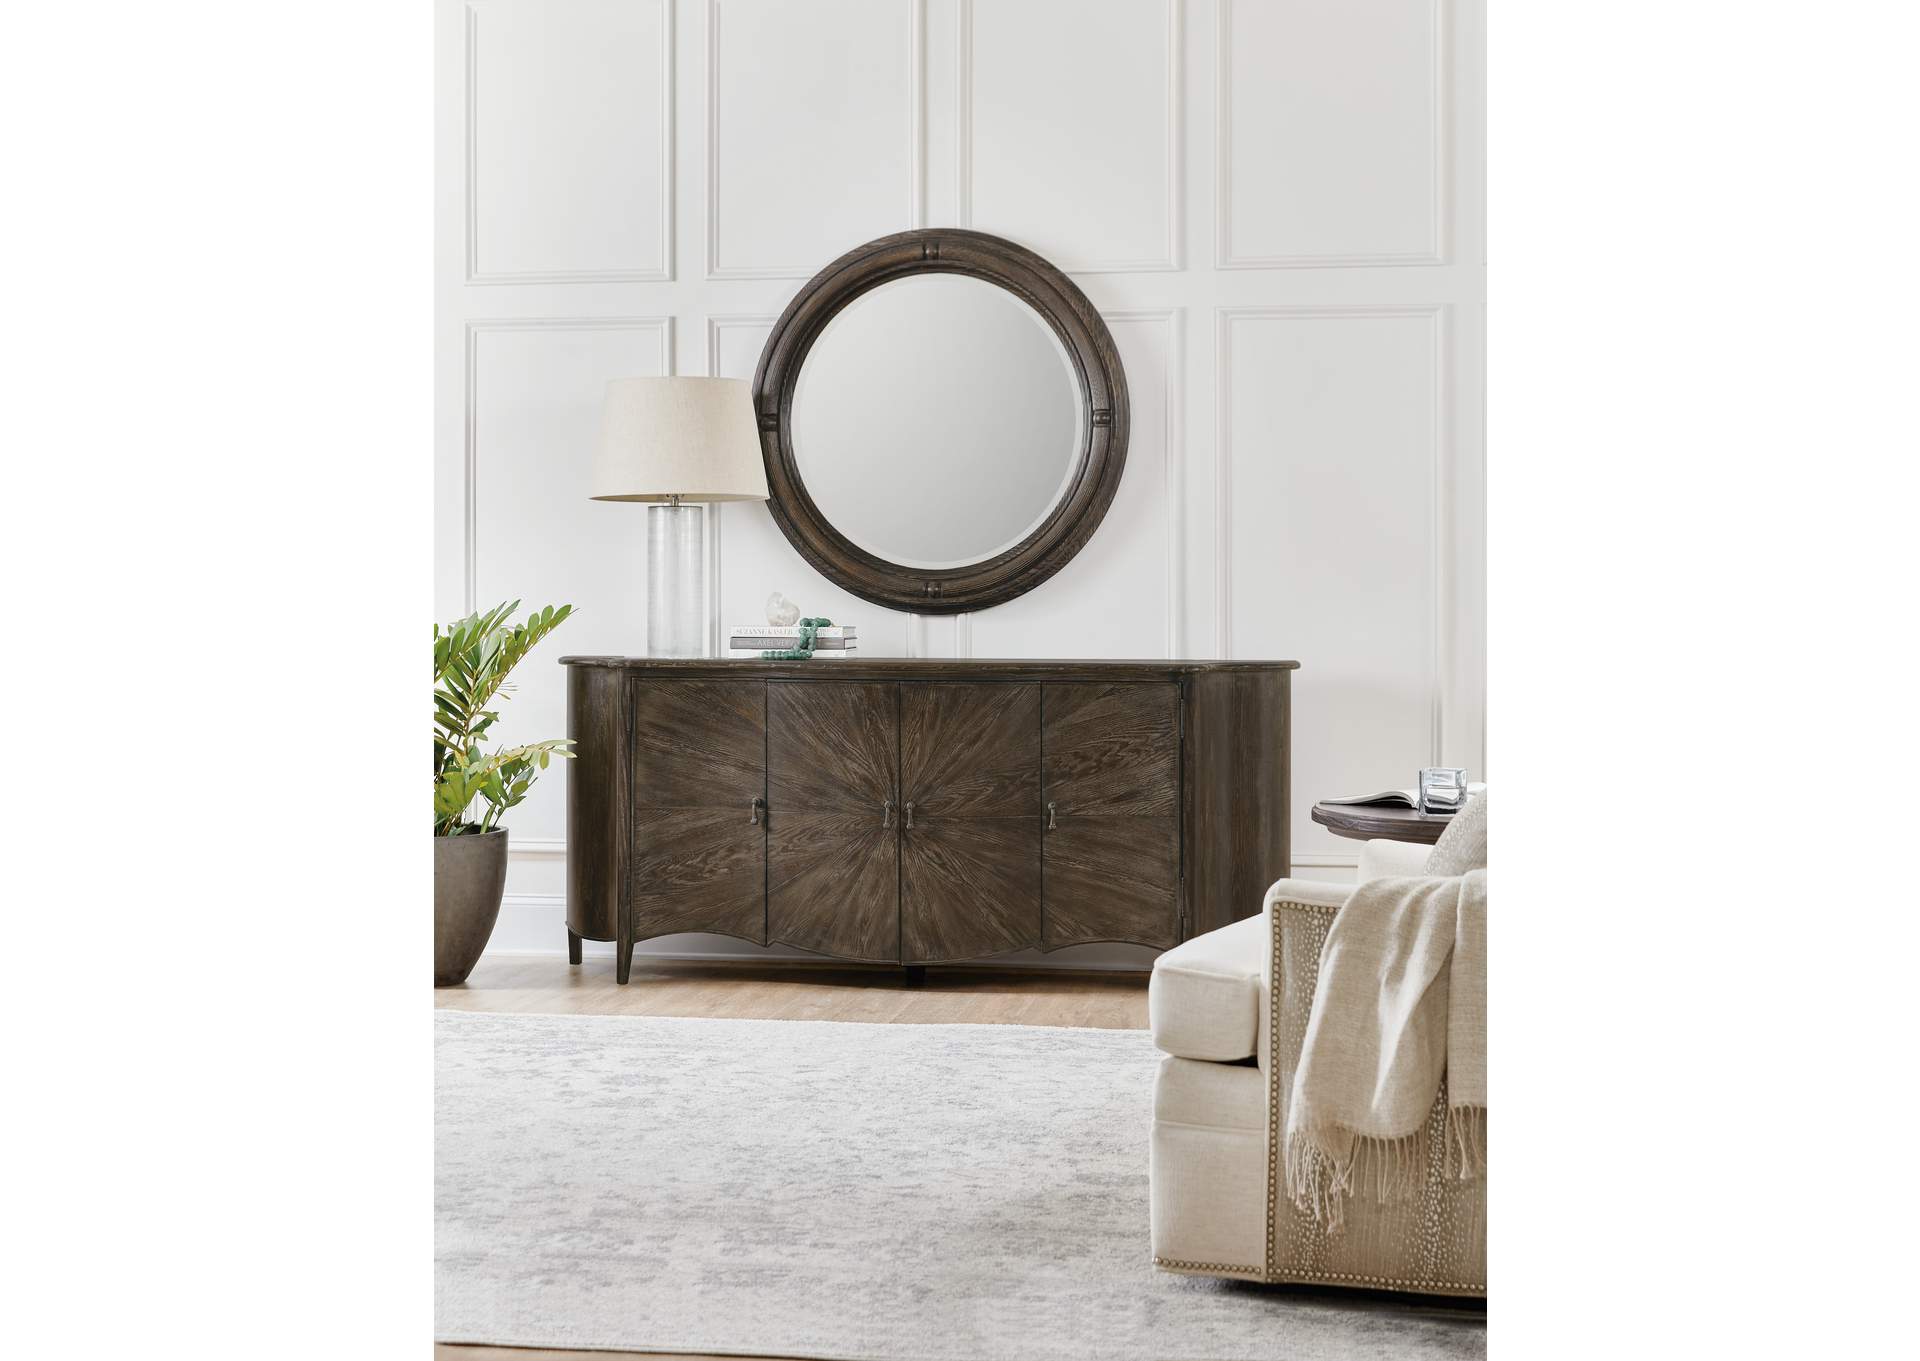 Traditions Round Mirror,Hooker Furniture